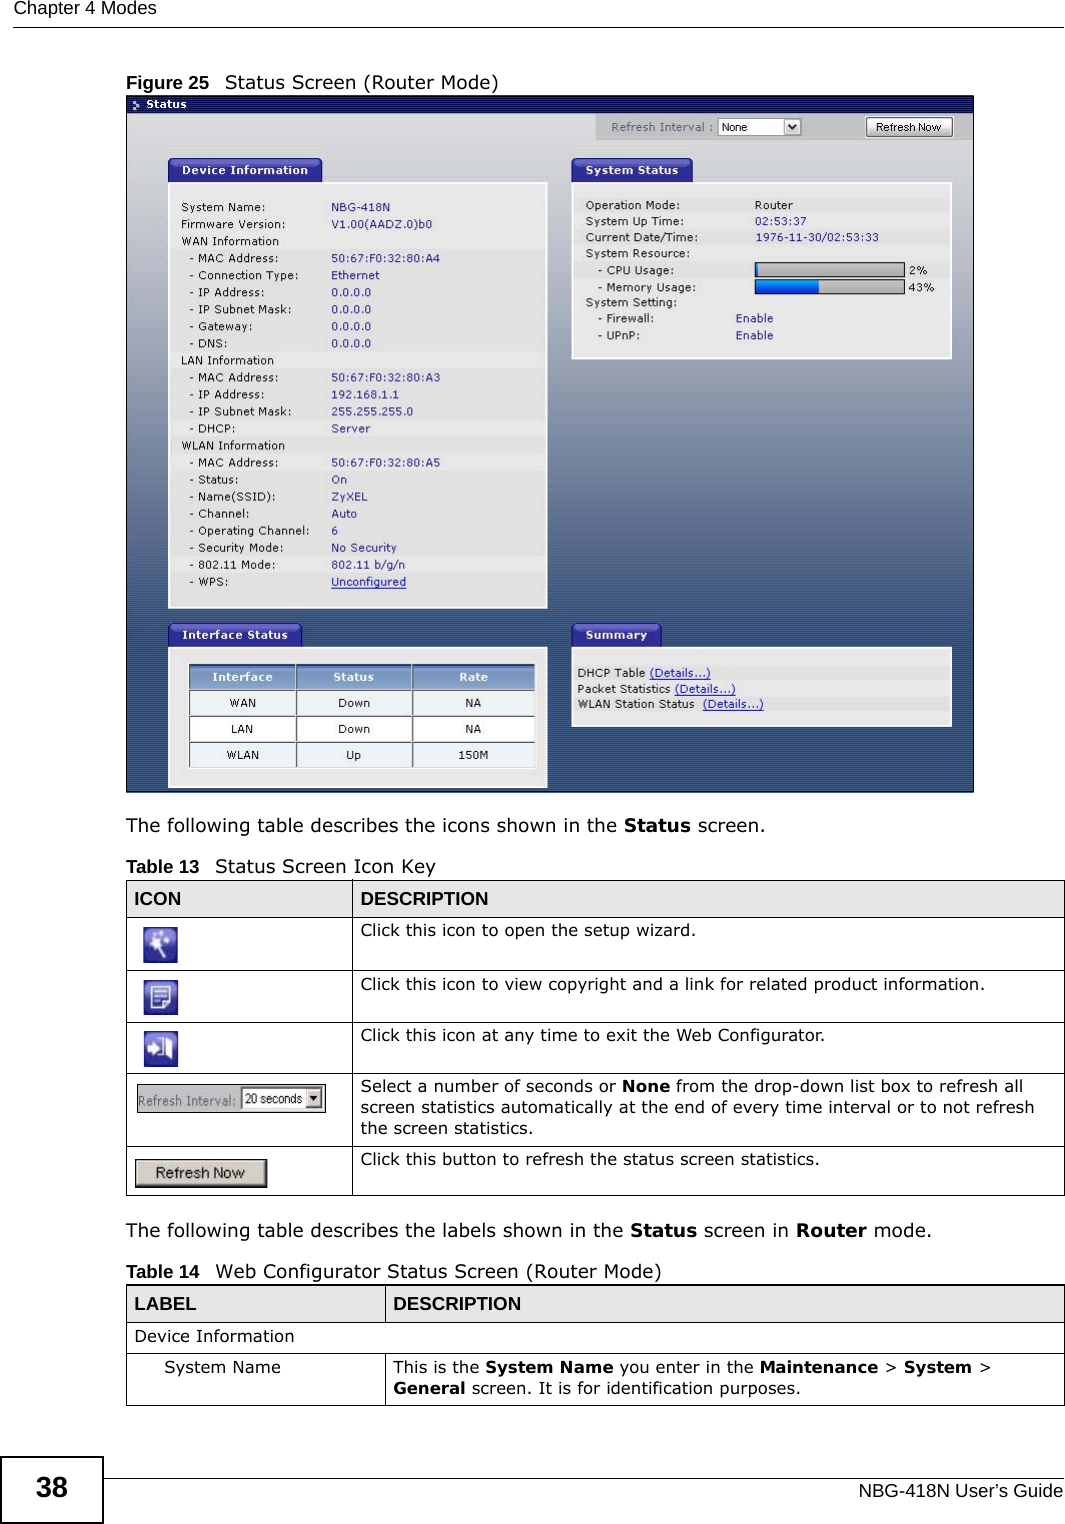 Chapter 4 ModesNBG-418N User’s Guide38Figure 25   Status Screen (Router Mode) The following table describes the icons shown in the Status screen.The following table describes the labels shown in the Status screen in Router mode.Table 13   Status Screen Icon Key ICON DESCRIPTIONClick this icon to open the setup wizard. Click this icon to view copyright and a link for related product information.Click this icon at any time to exit the Web Configurator.Select a number of seconds or None from the drop-down list box to refresh all screen statistics automatically at the end of every time interval or to not refresh the screen statistics.Click this button to refresh the status screen statistics.Table 14   Web Configurator Status Screen (Router Mode)  LABEL DESCRIPTIONDevice InformationSystem Name This is the System Name you enter in the Maintenance &gt; System &gt; General screen. It is for identification purposes.